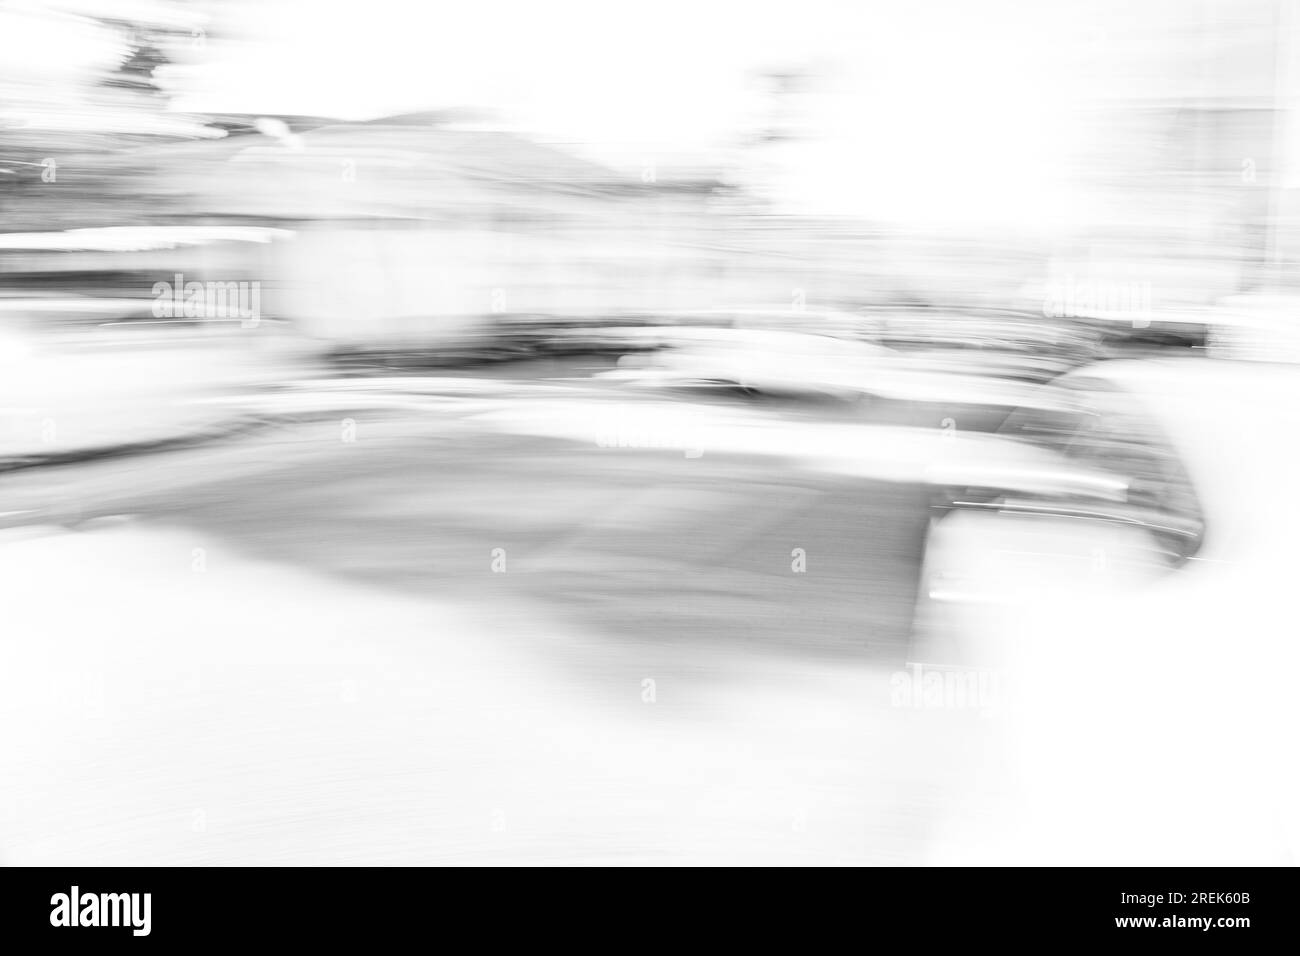 Abstract photography. Deliberately shaken, out of focus, blurred, inconsistently exposed. Creative digitally processed street photography. Stock Photo